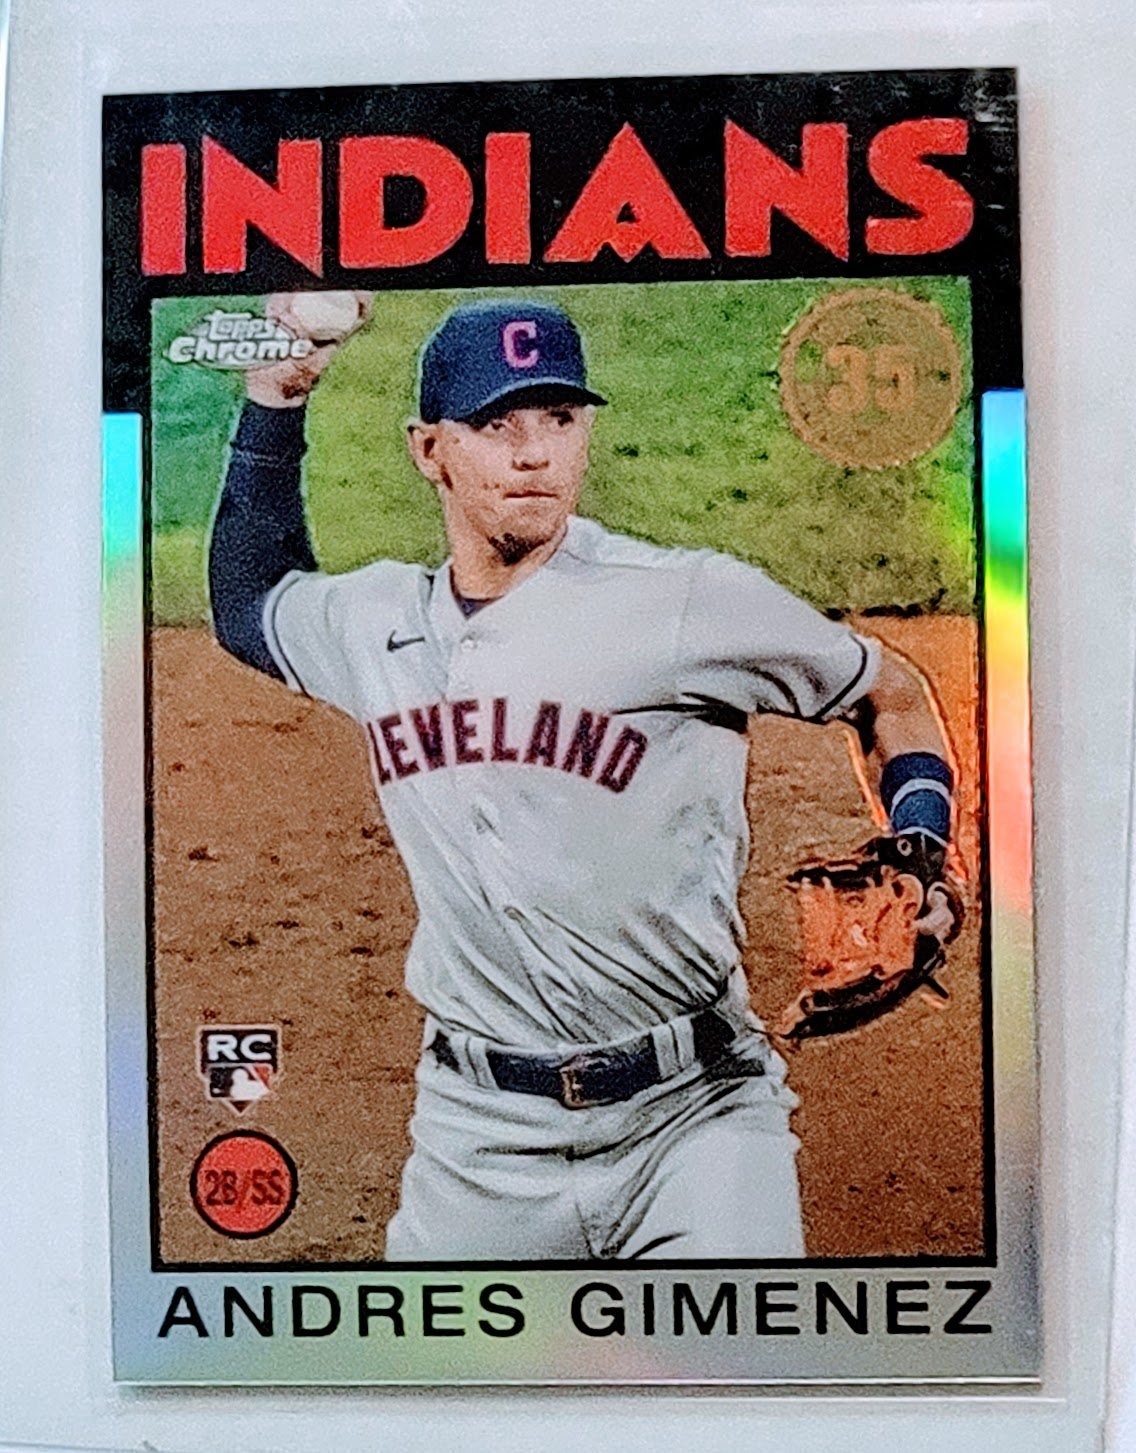 2021 Topps Chrome Update Andres Gimenez 1985 35th Anniversary Rookie Refractor Baseball Card TPTV simple Xclusive Collectibles   